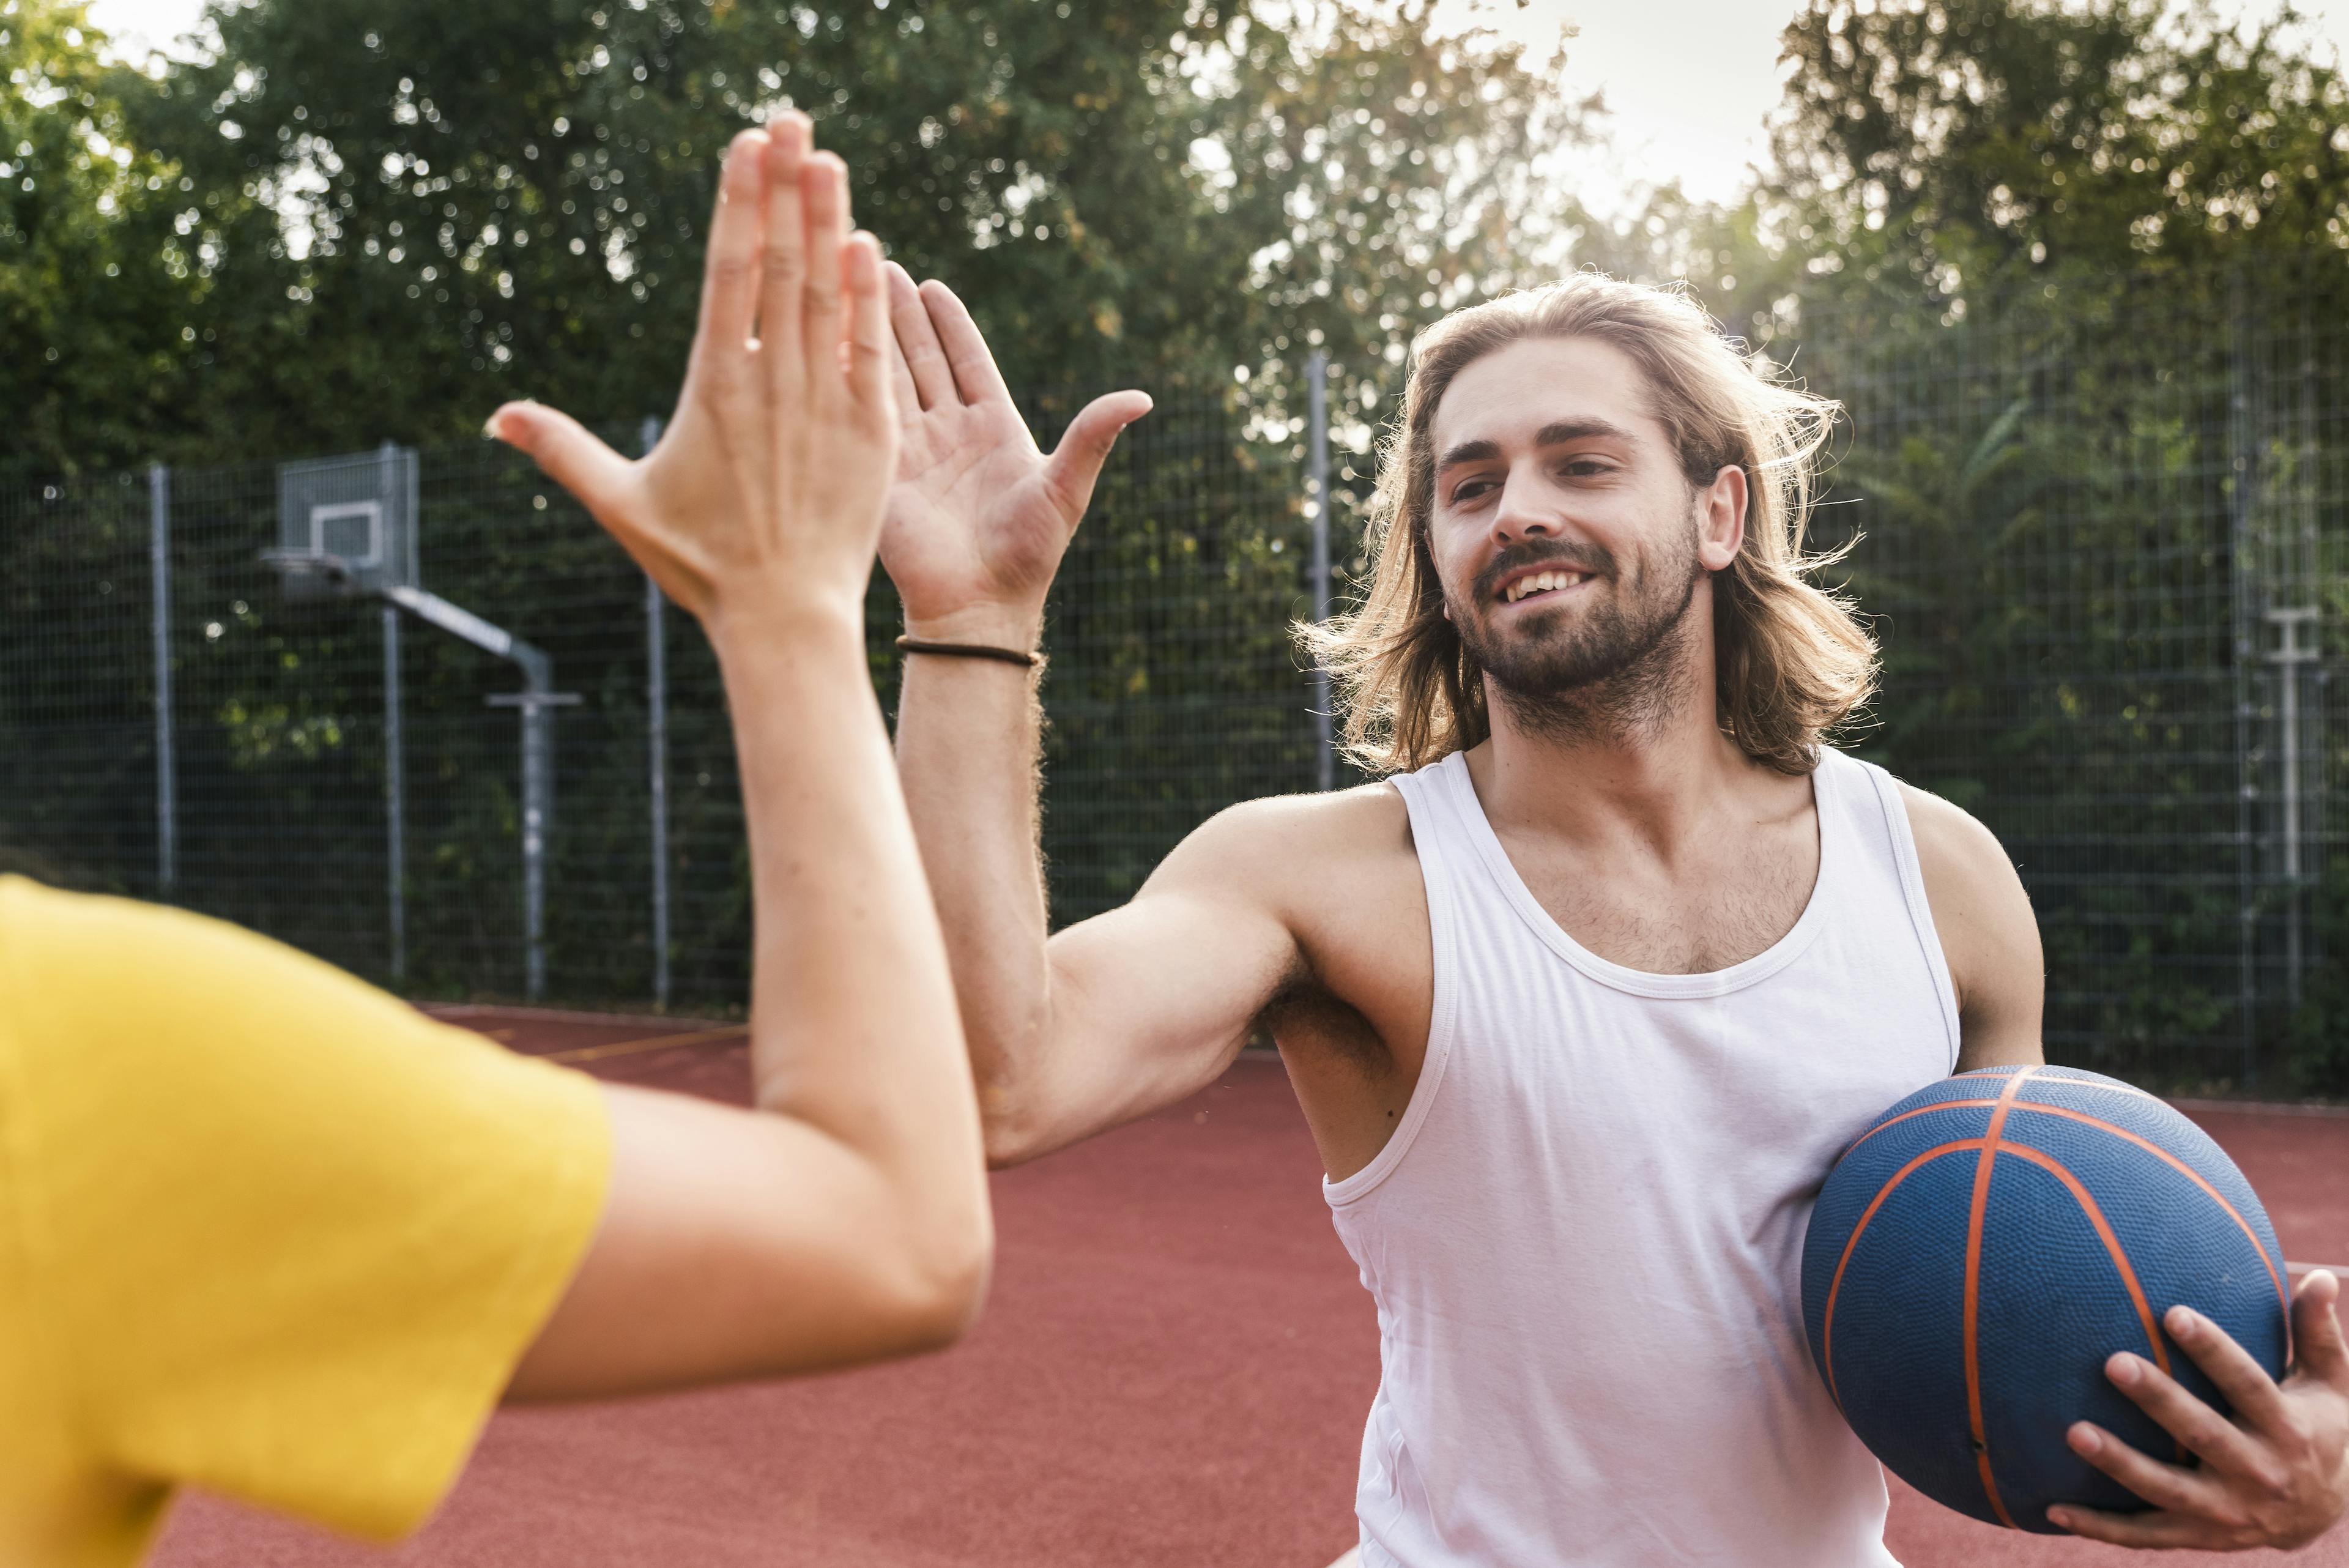 Young man and young woman high-fiving after basketball game